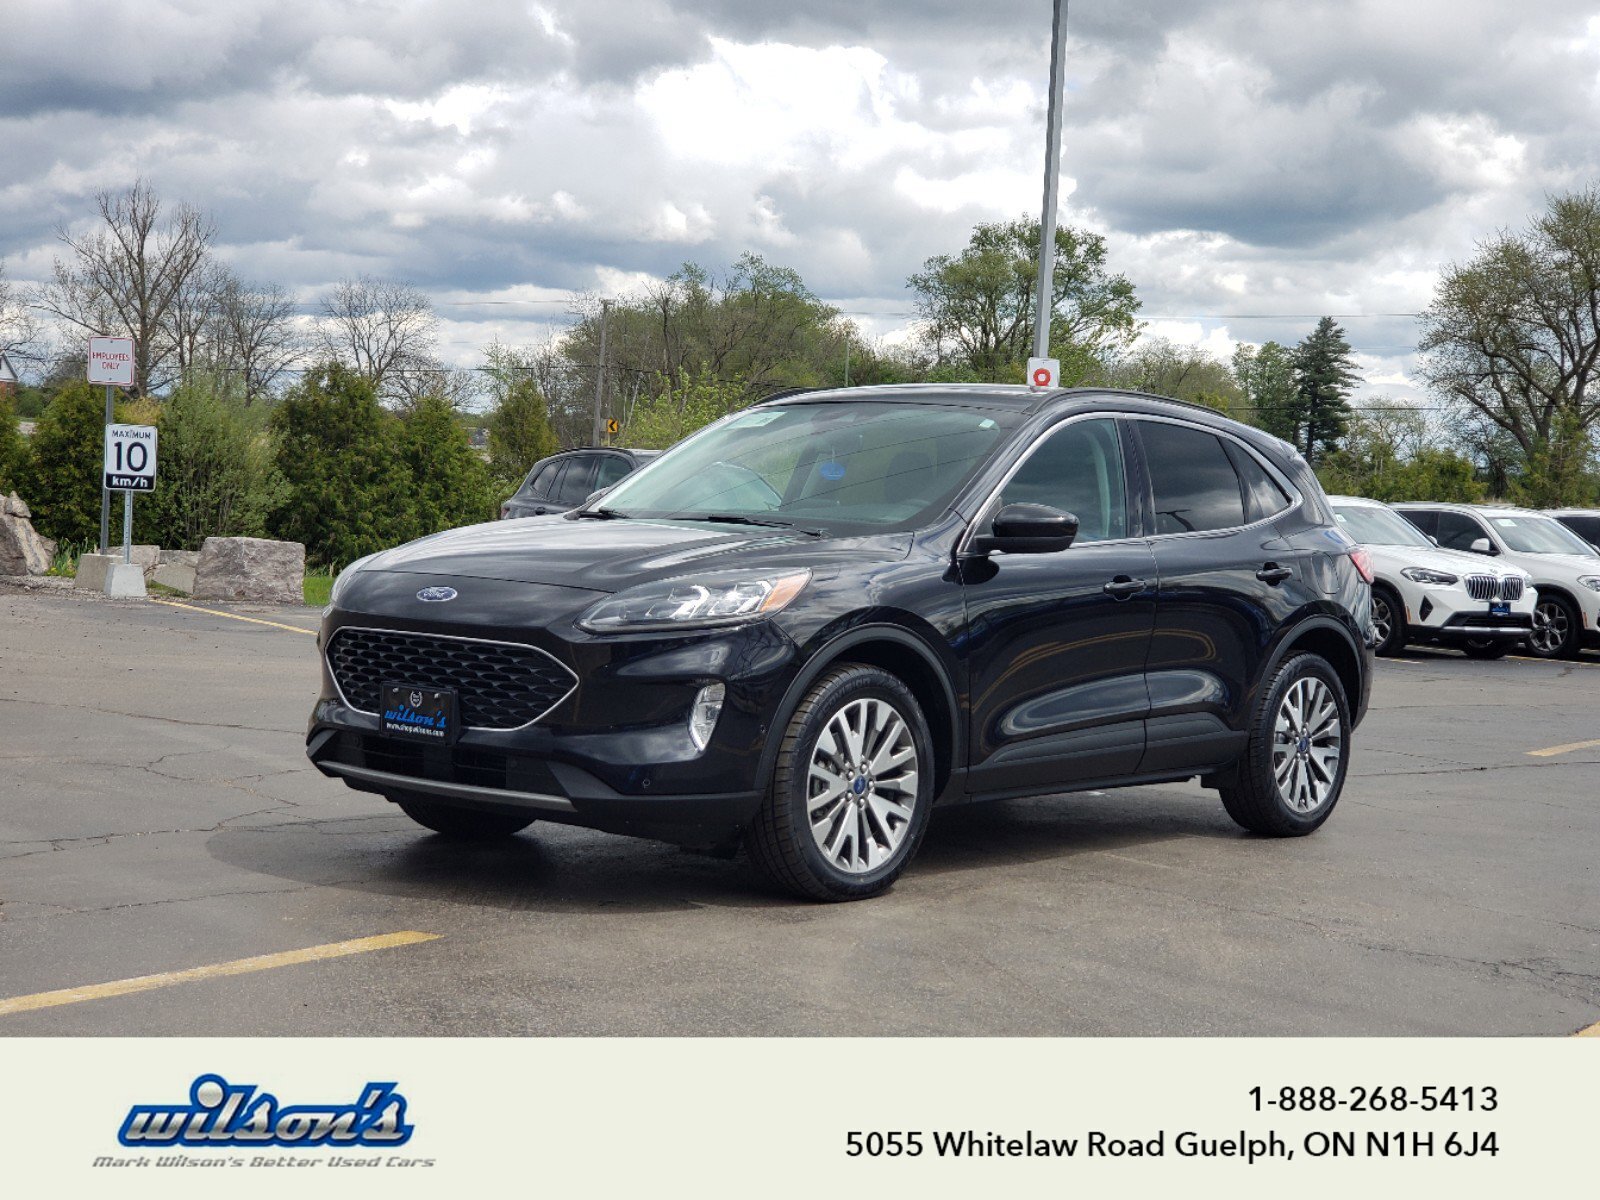 2021 Ford Escape Titanium AWD, Pano Roof, Leather, Nav, Heated Stee